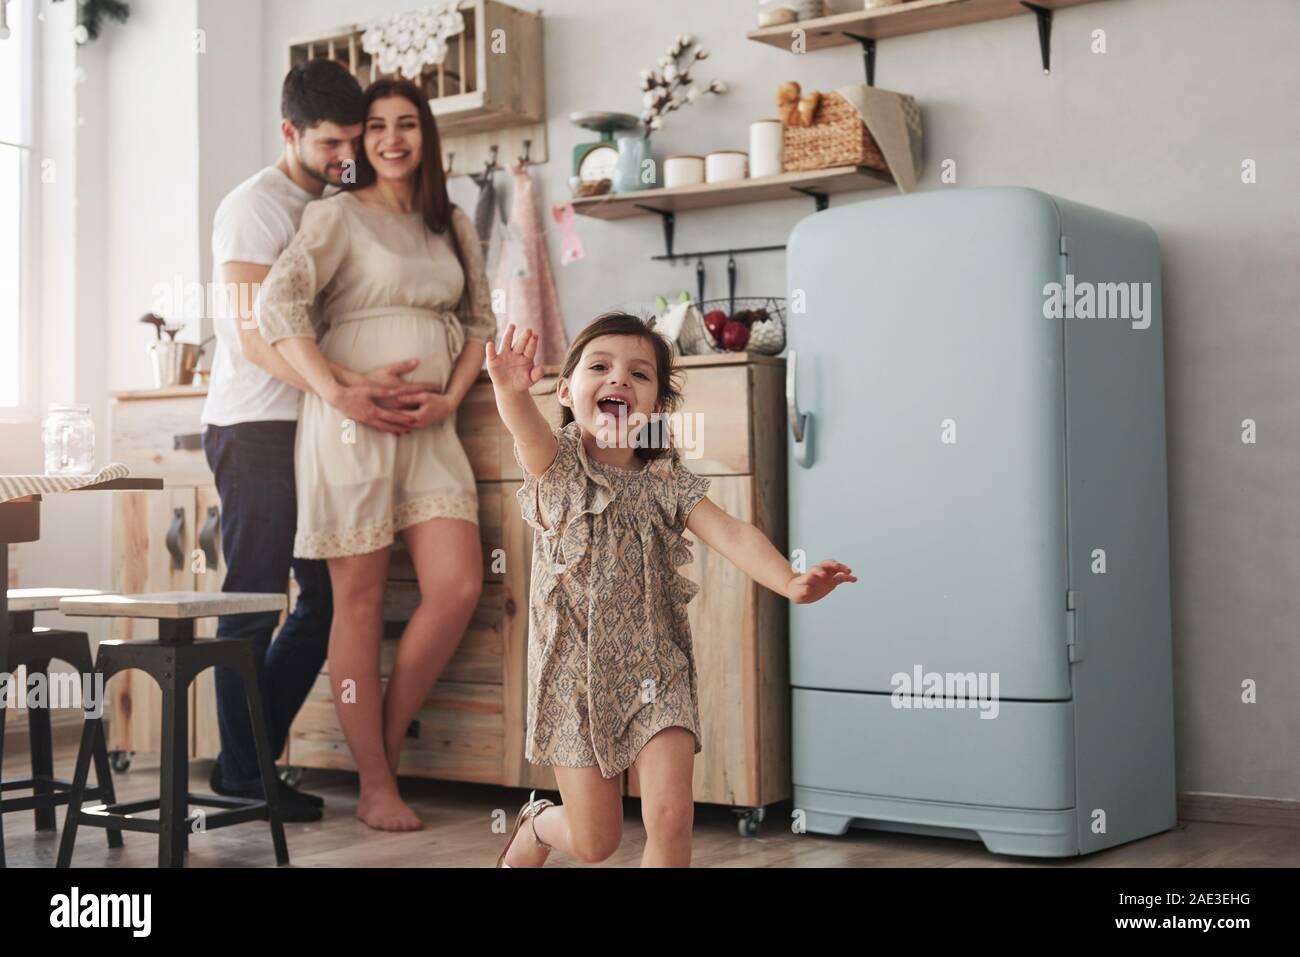 Cheerful people. Playful female child have fun by running in the kitchen at daytime of front of her mother and father Stock Photo